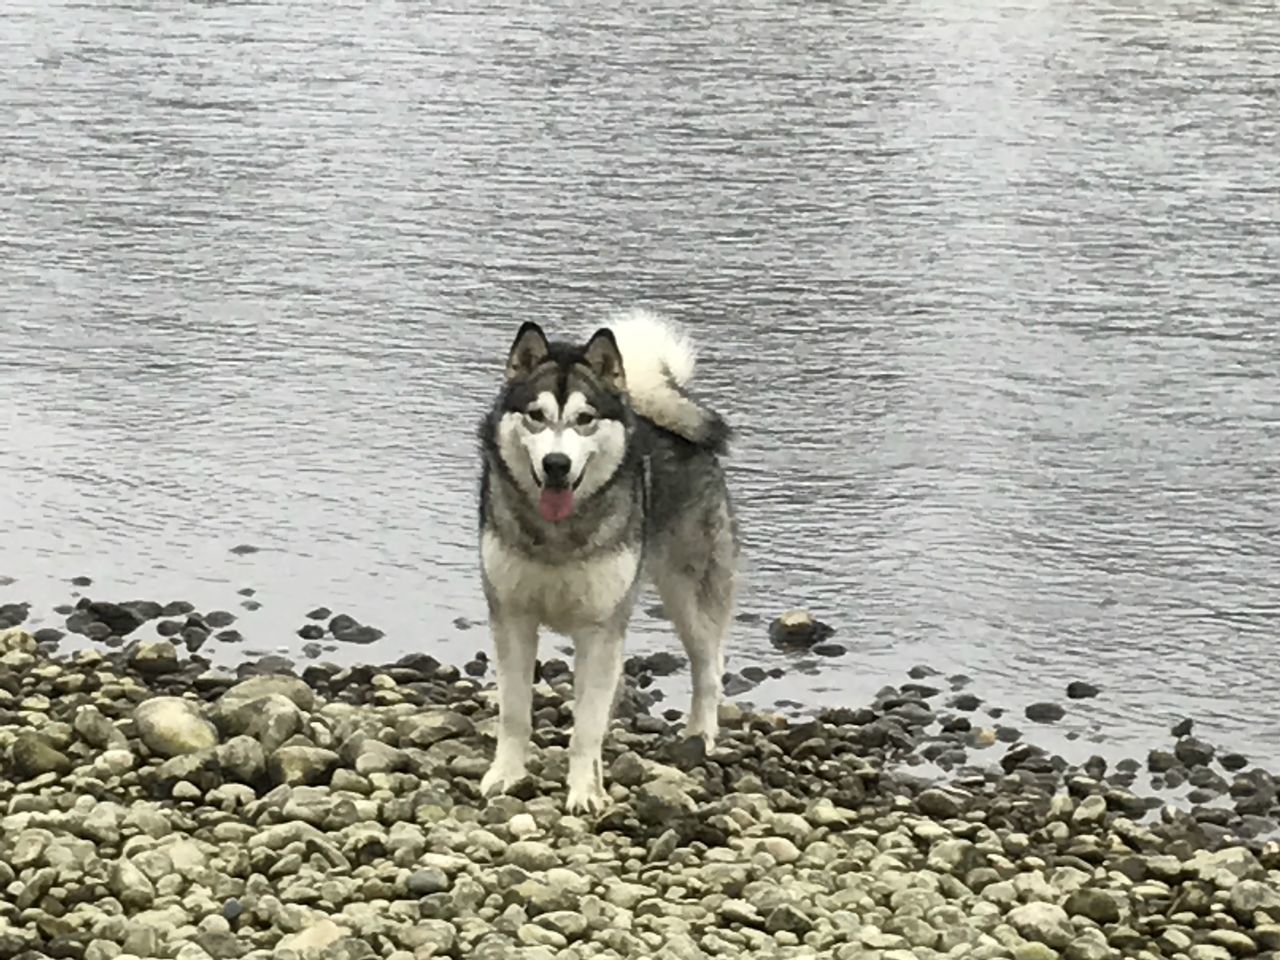 looking at camera, dog, animal themes, portrait, one animal, pets, domestic animals, outdoors, mouth open, mammal, siberian husky, water, nature, day, no people